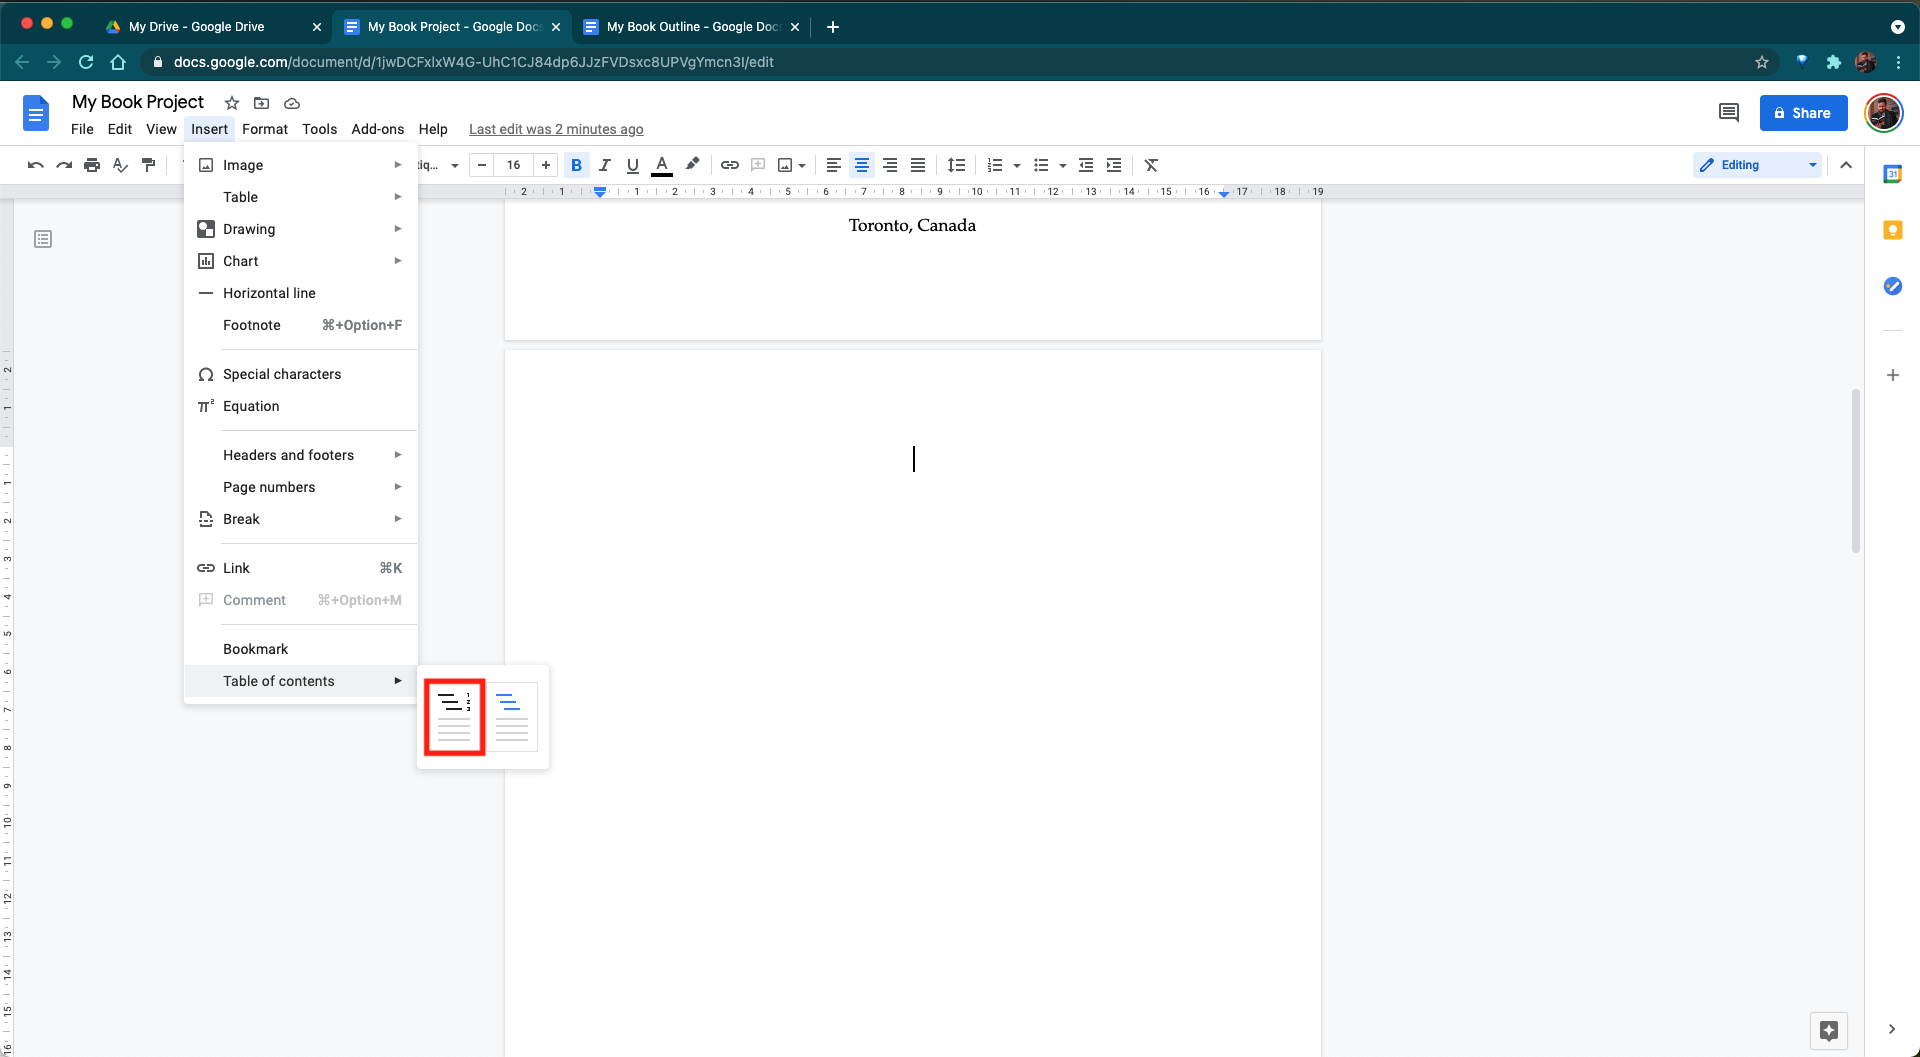 Creating a table of contents in Google Docs